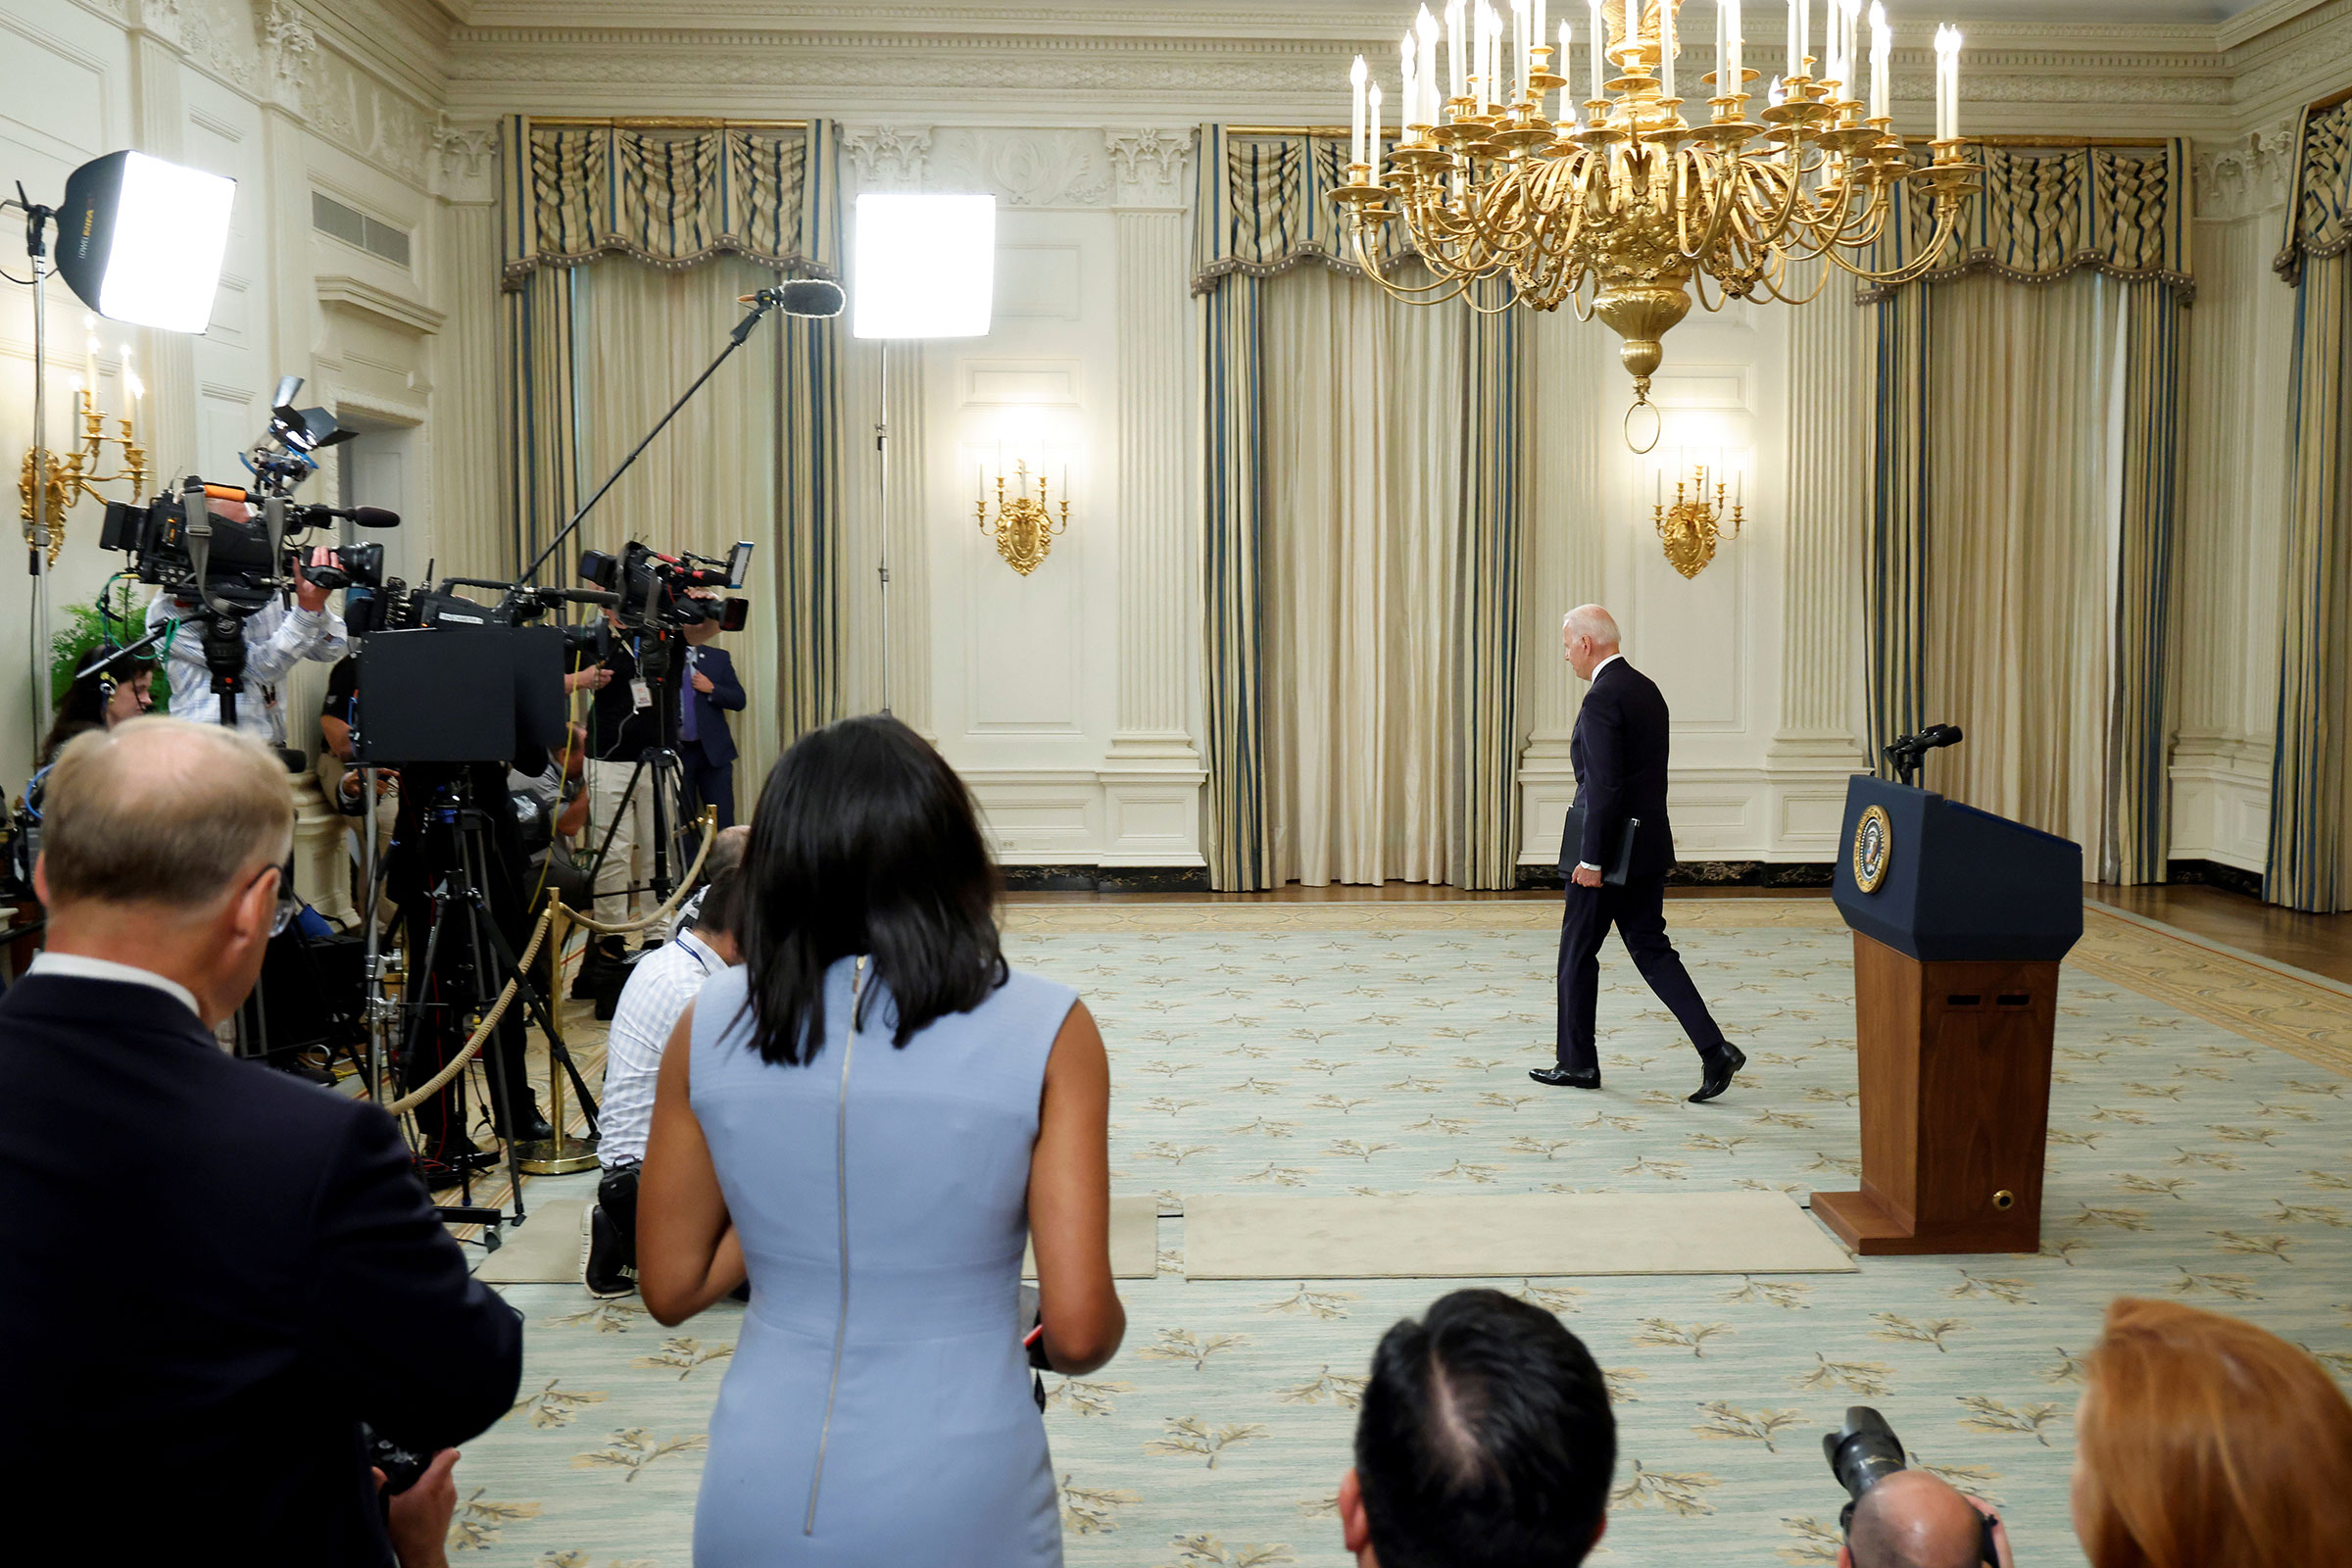 U.S. President Joe Biden departs after delivering remarks on the economy at the White House in Washington